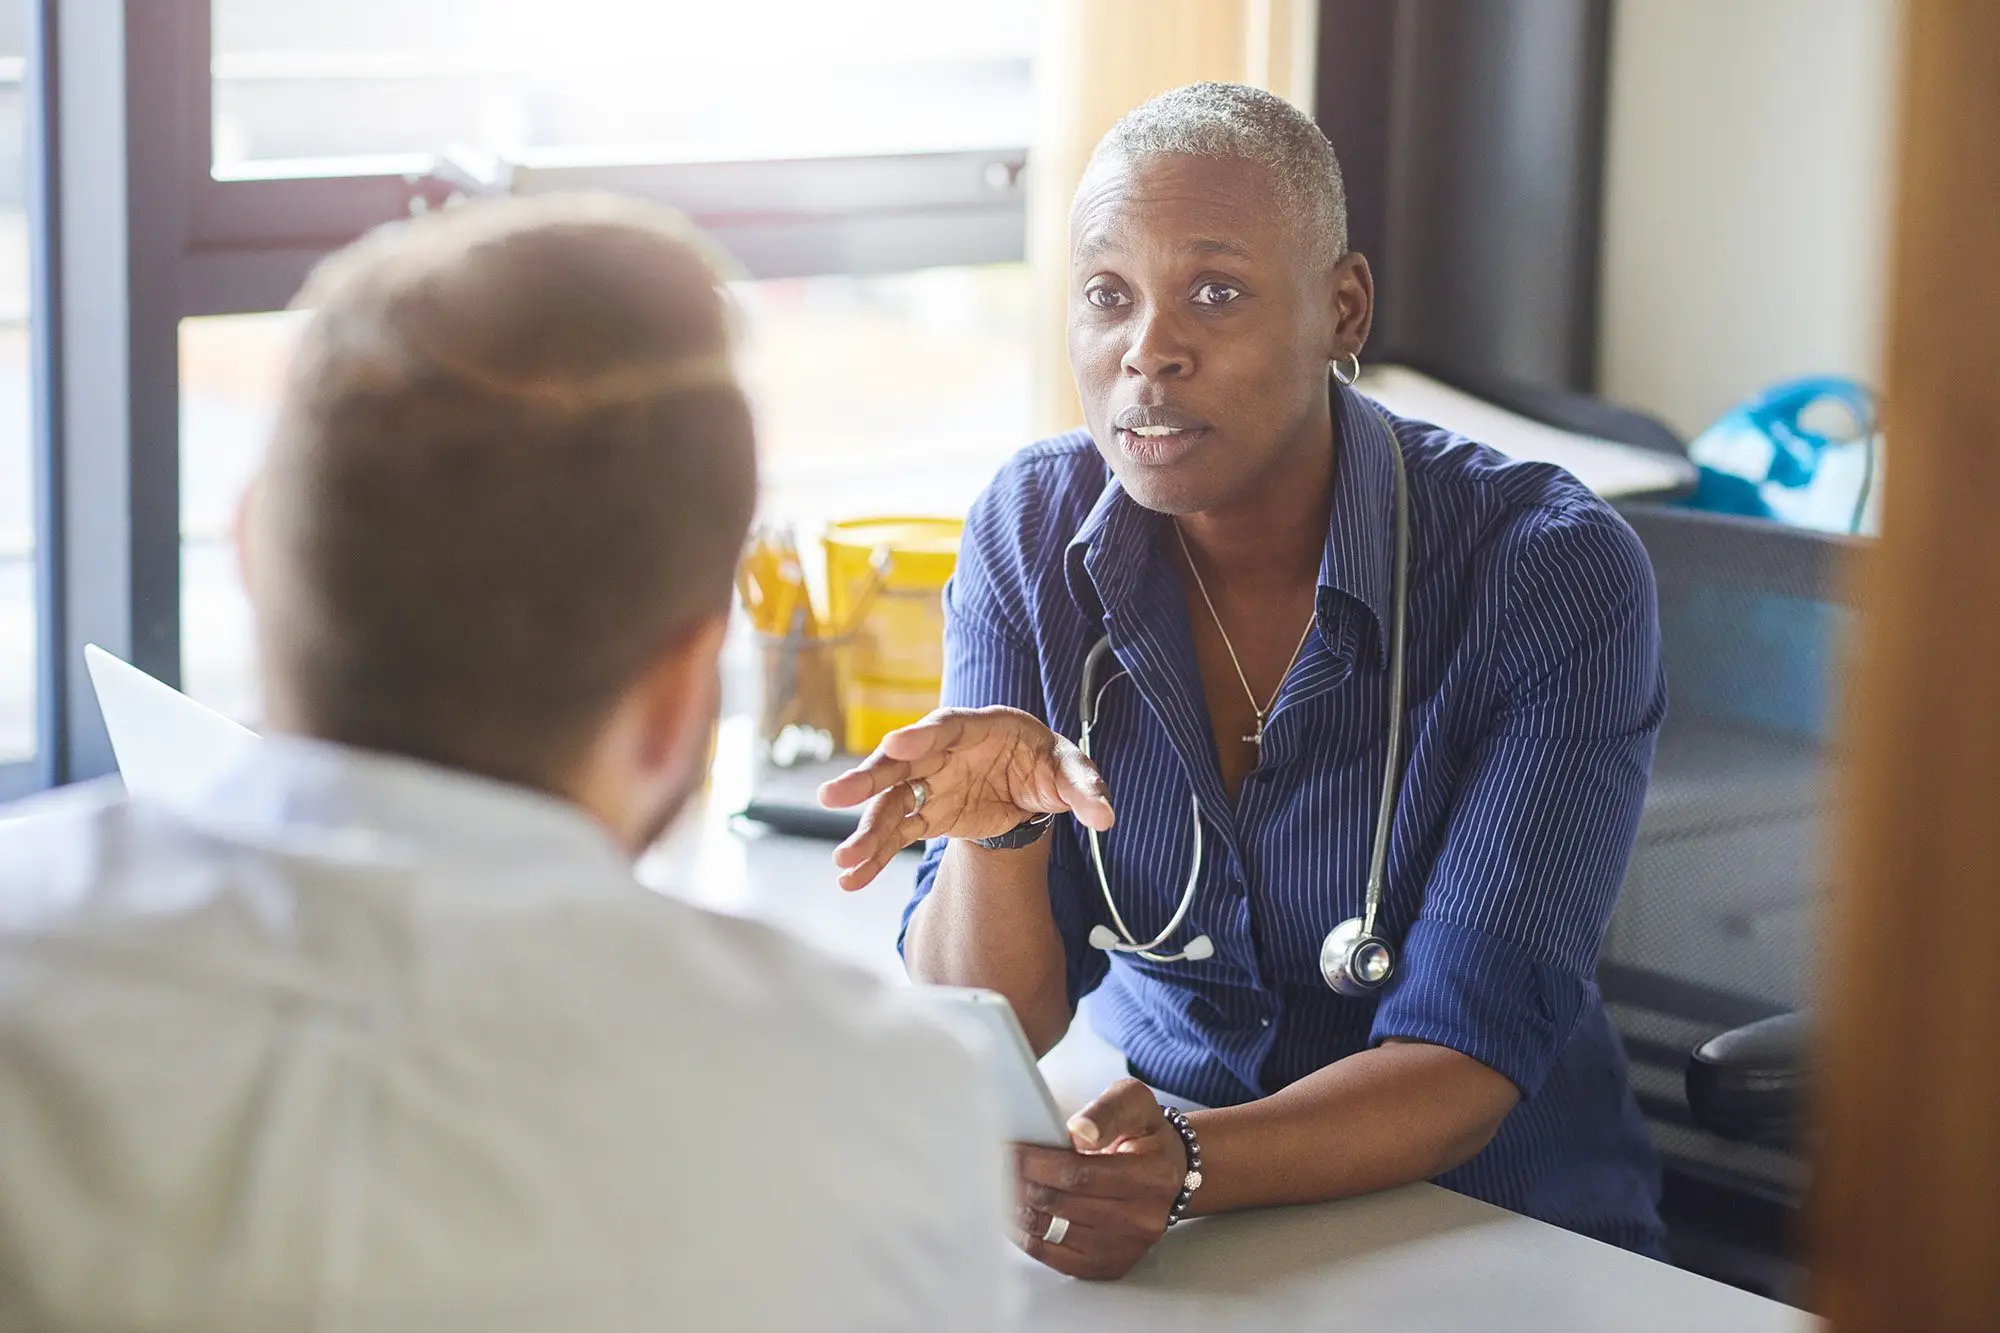 How to Find the Best Primary Care Doctor